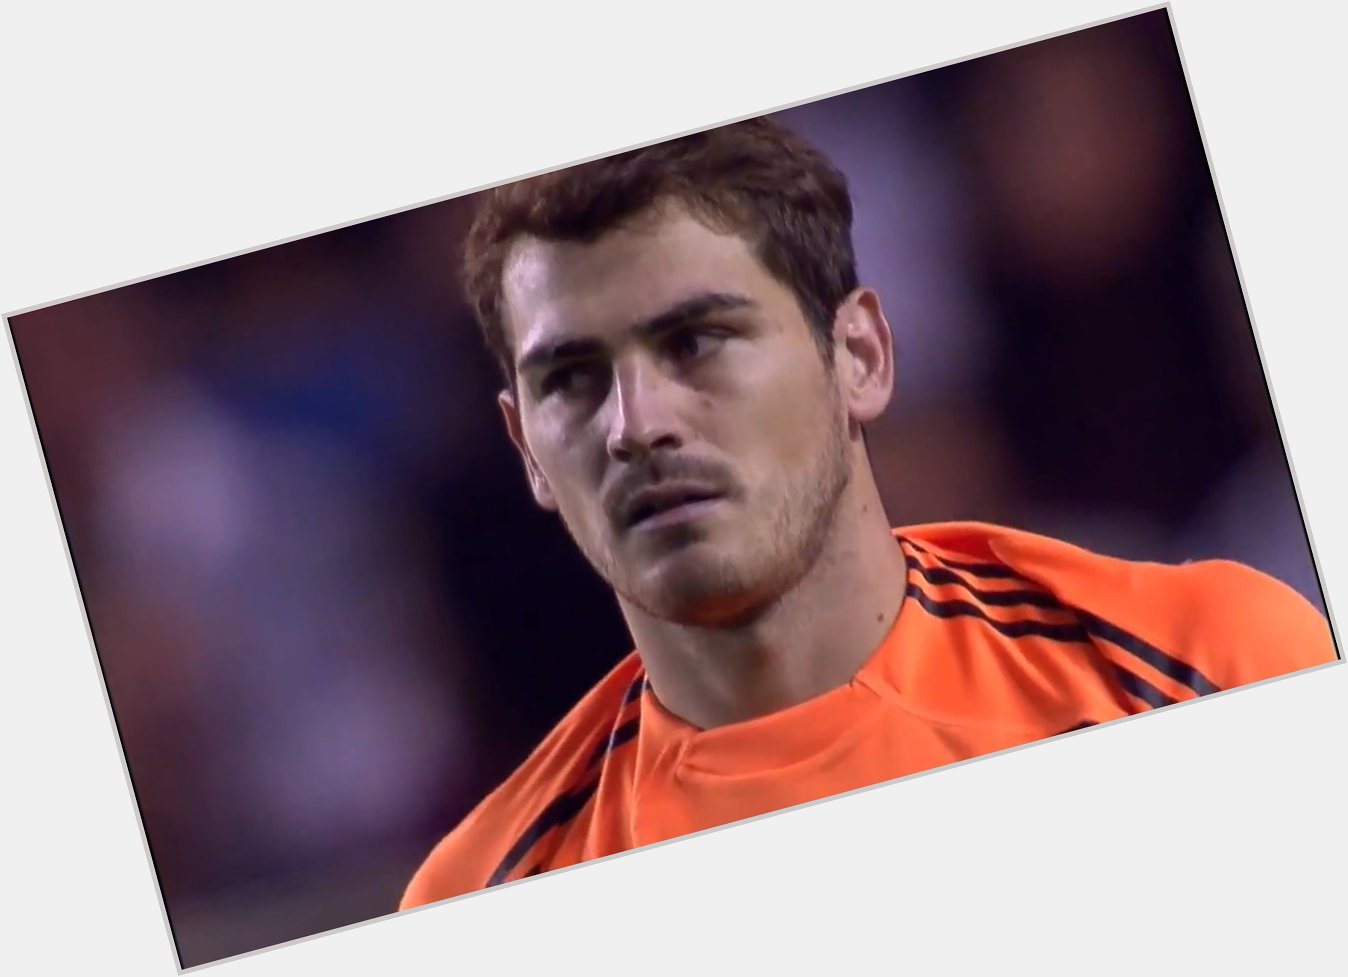 Happy birthday, Iker Casillas! Which of these two saves do you prefer? 

